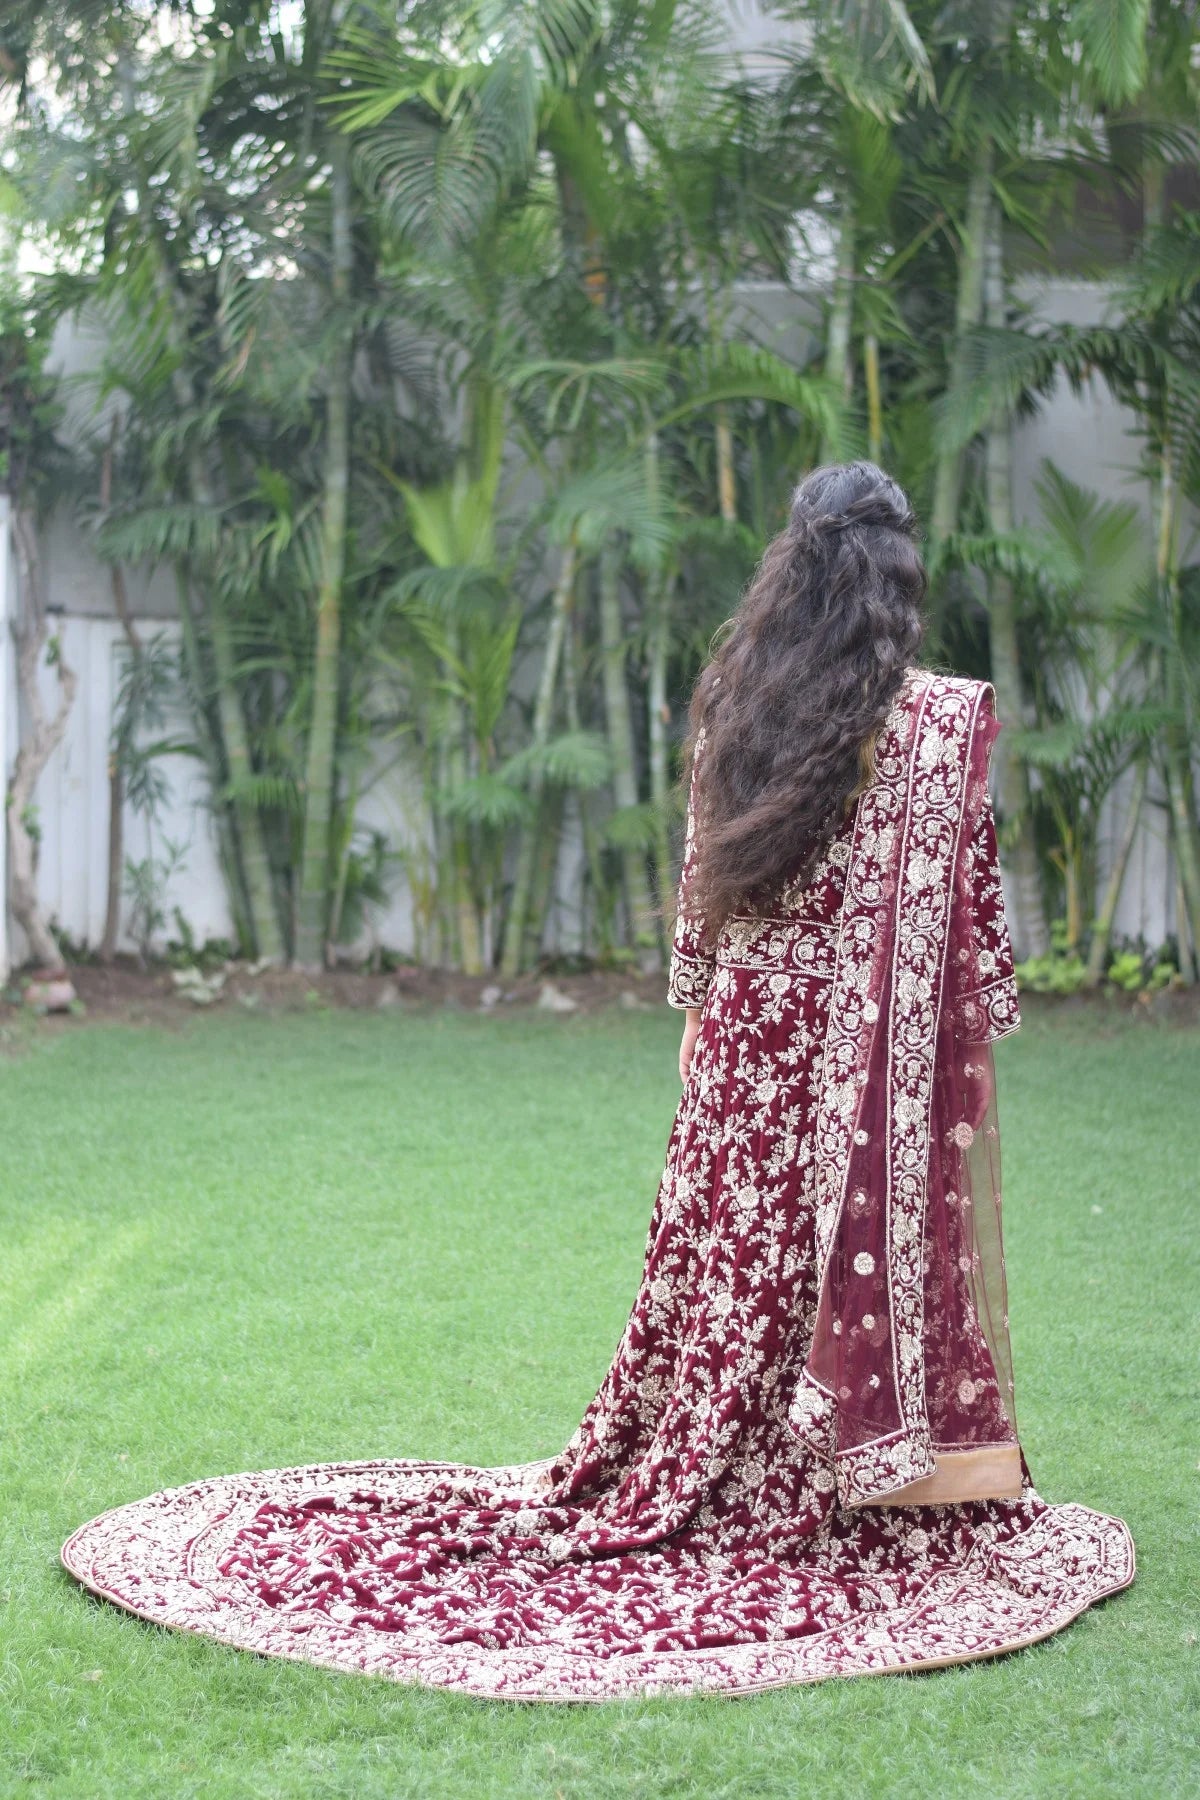 This Trail Gown in maroon is a showstopper, as evidenced by the way it flatters the curves of this Indian woman.